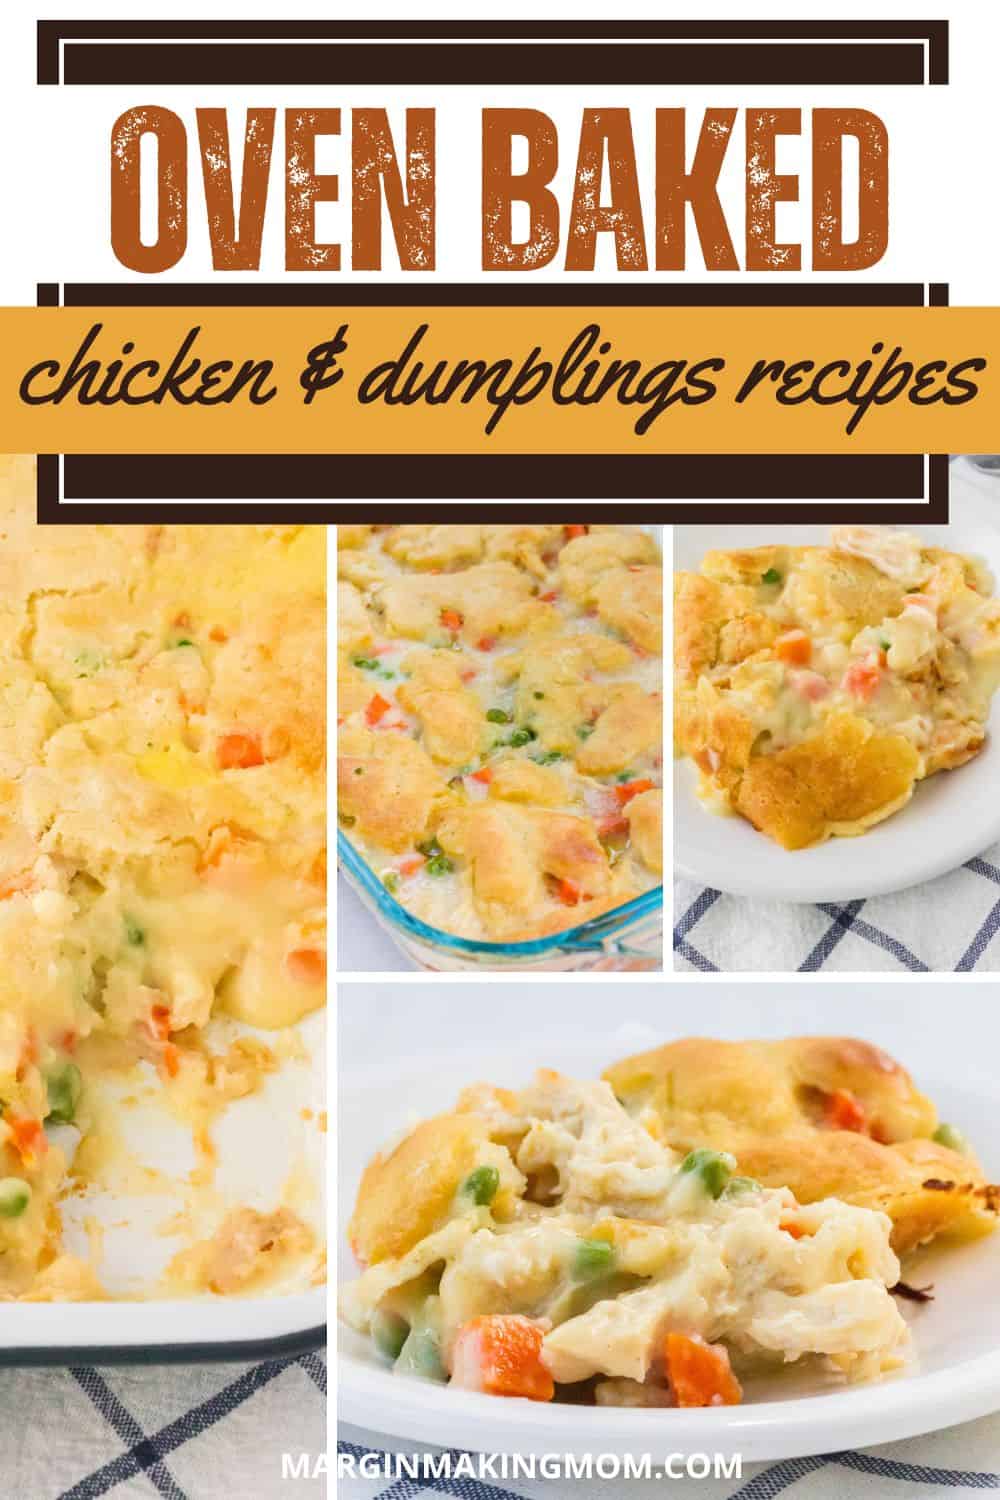 collage image featuring photos of oven-baked chicken and dumplings recipes.